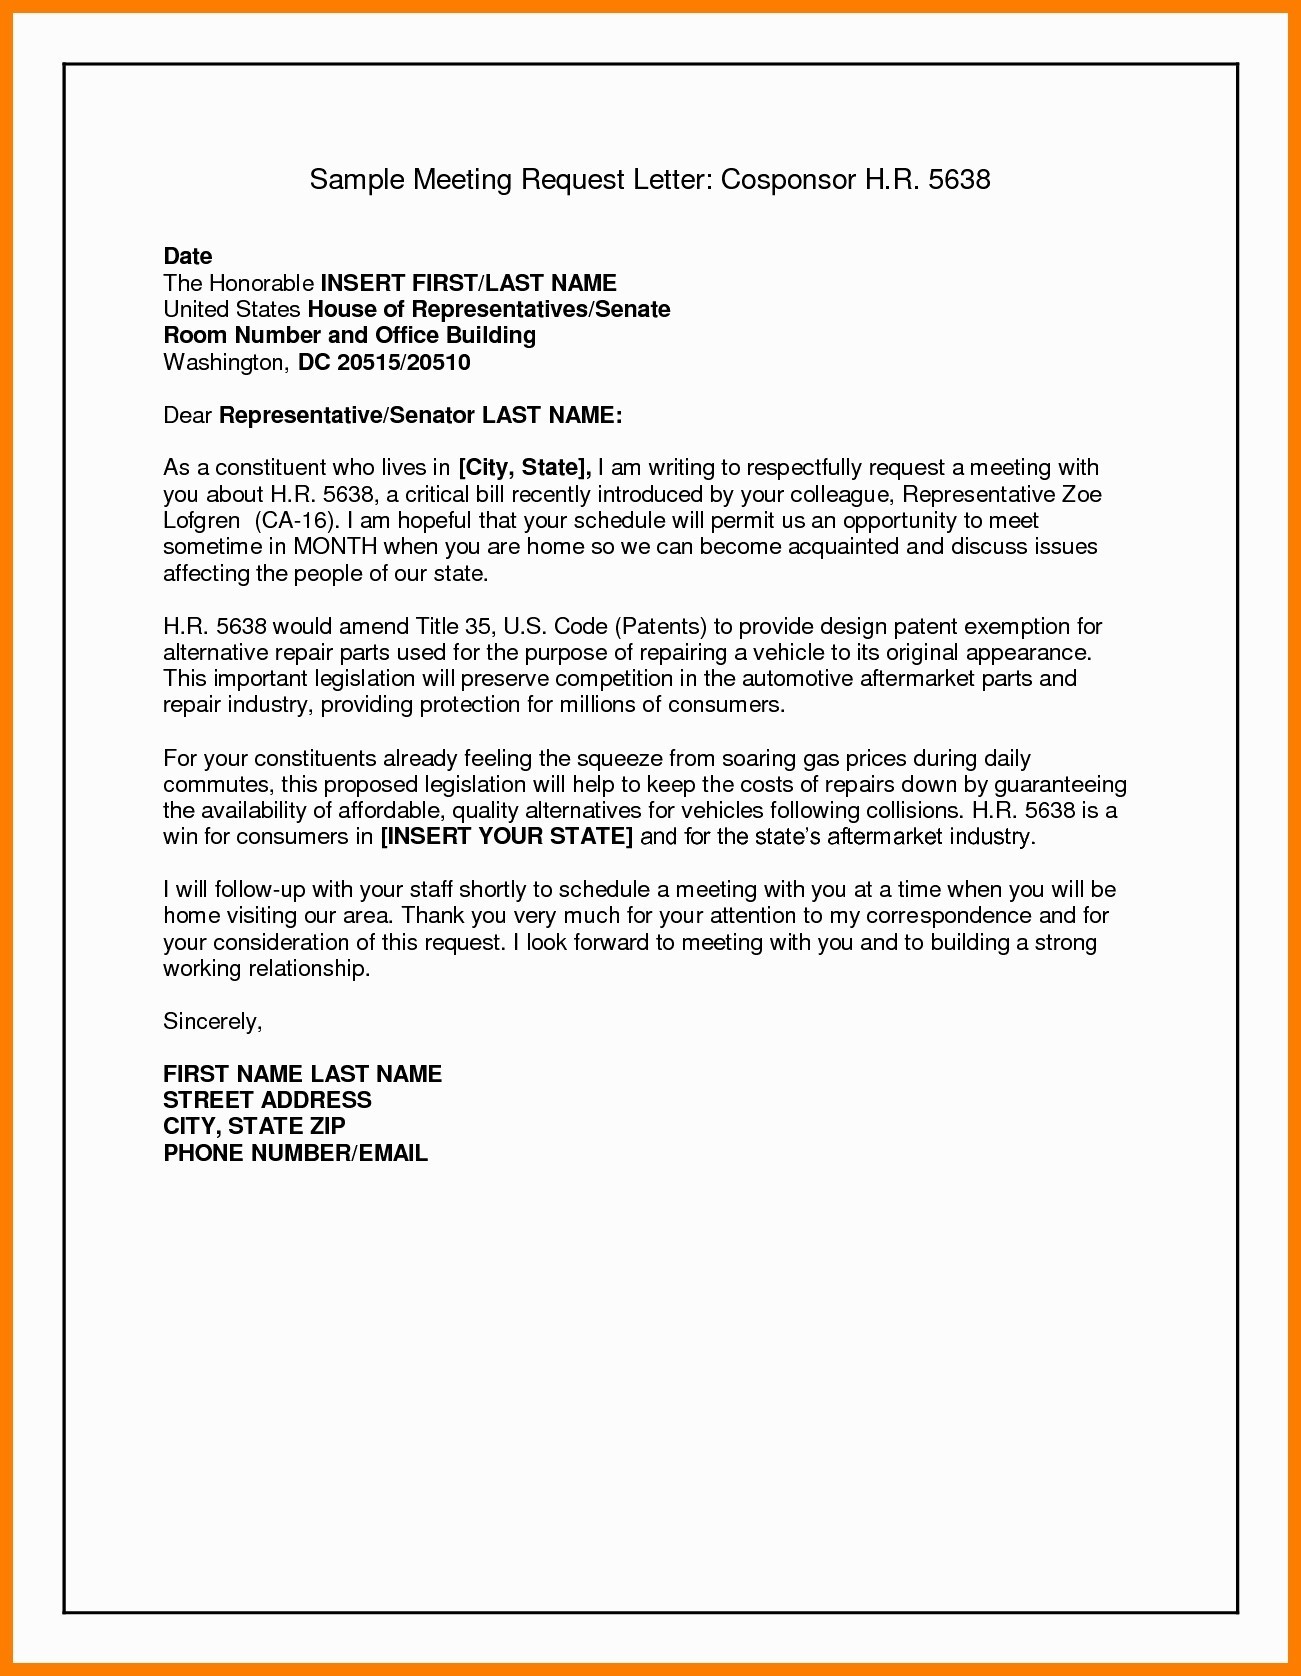 Letter To Request Business Meeting Archives Divansm Co Save Document Email Sample